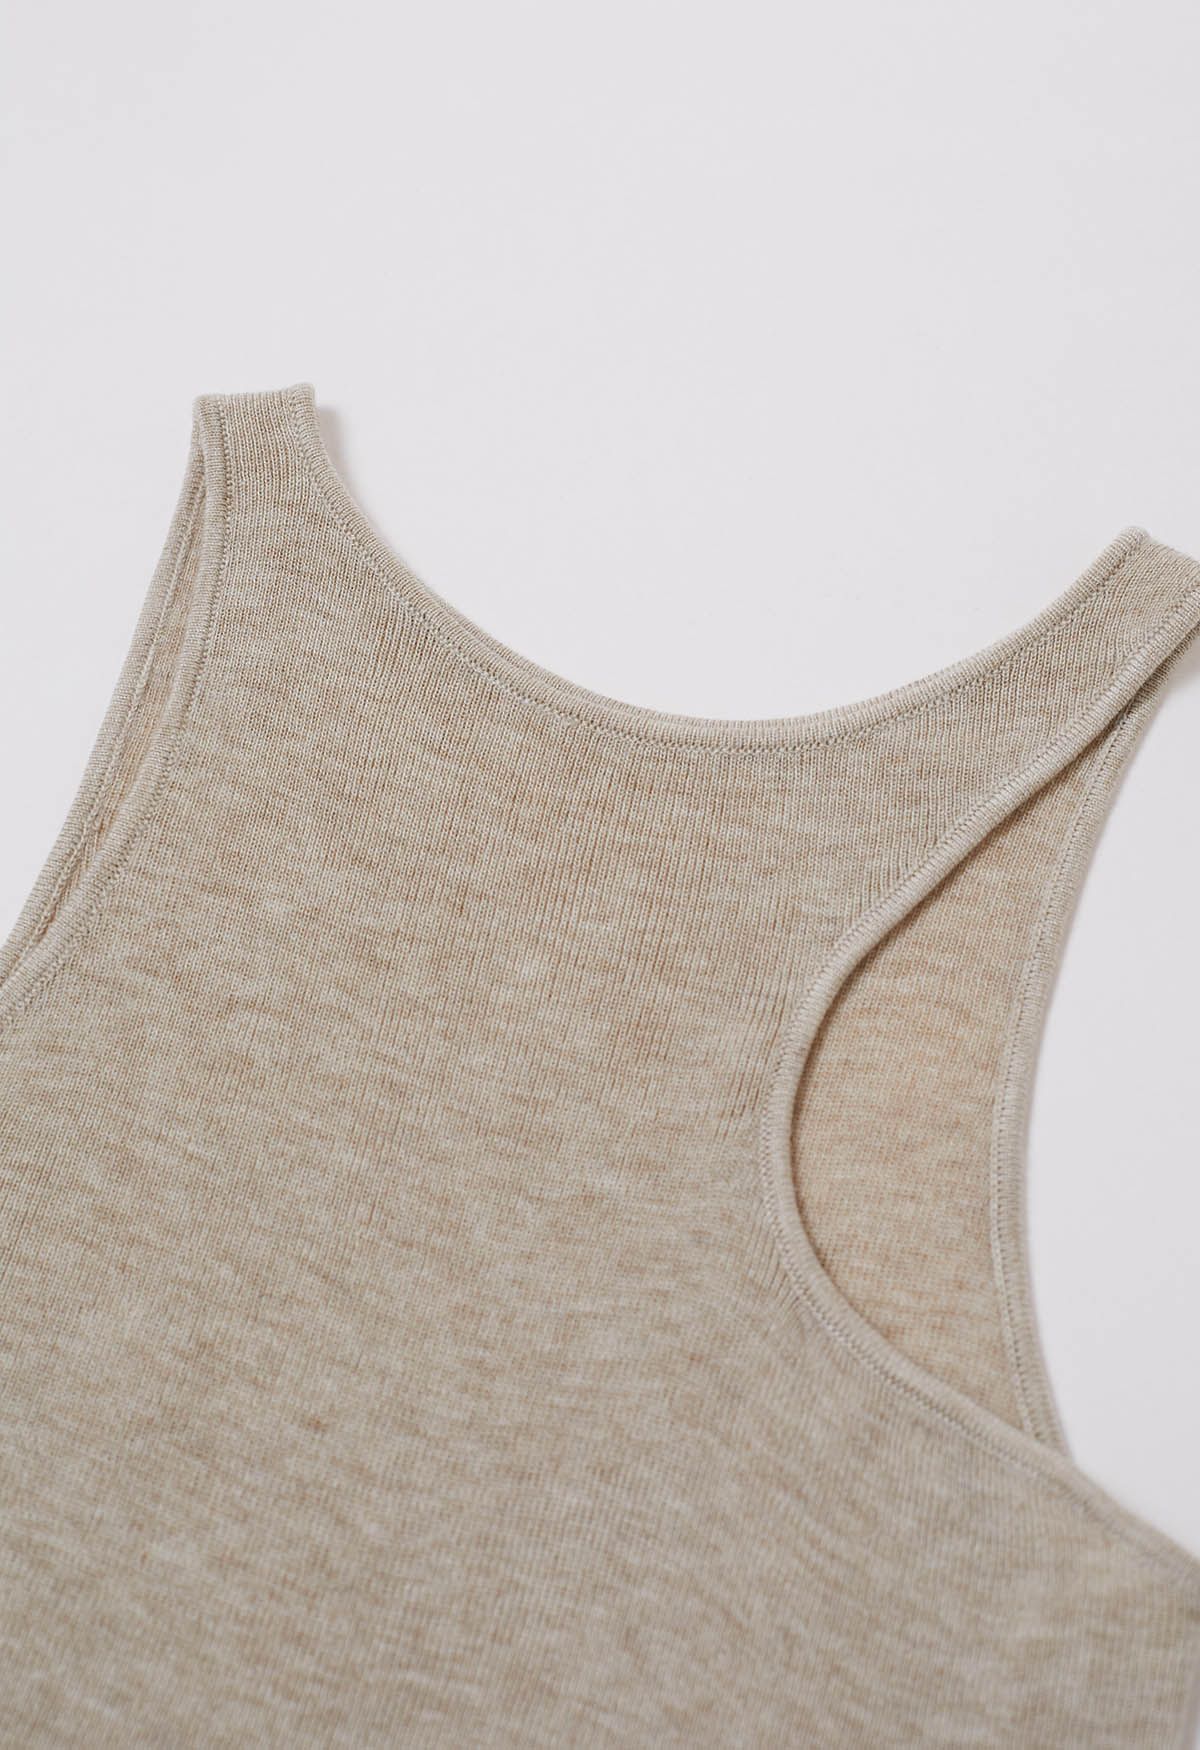 Chic Impression Knit Tank Top in Oatmeal